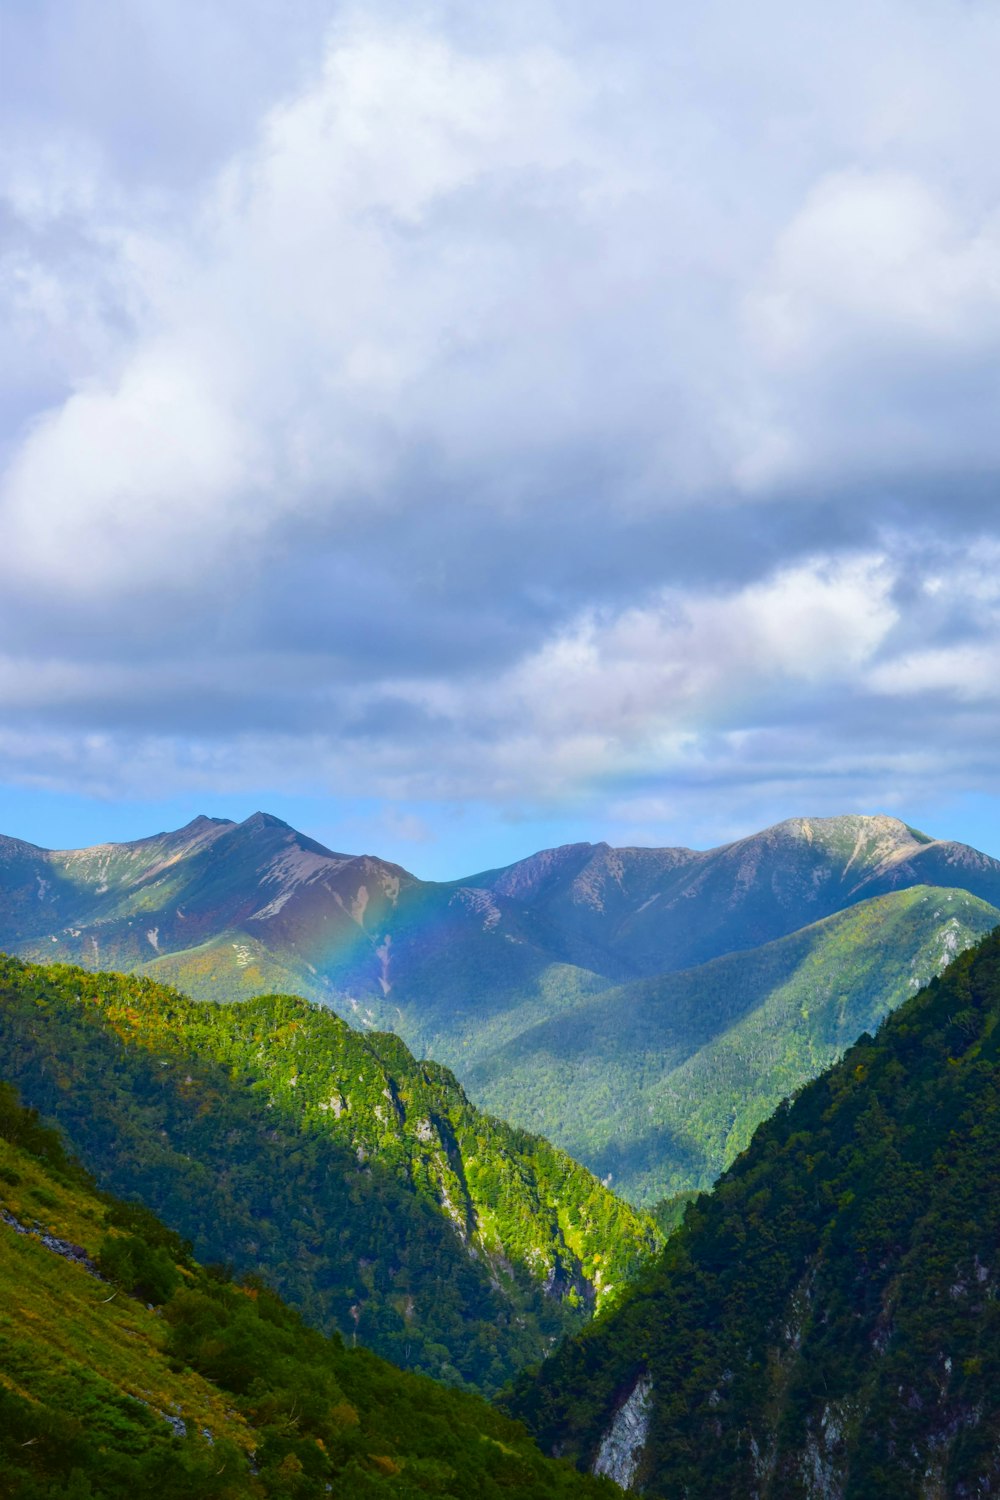 a view of a mountain range with a rainbow in the sky